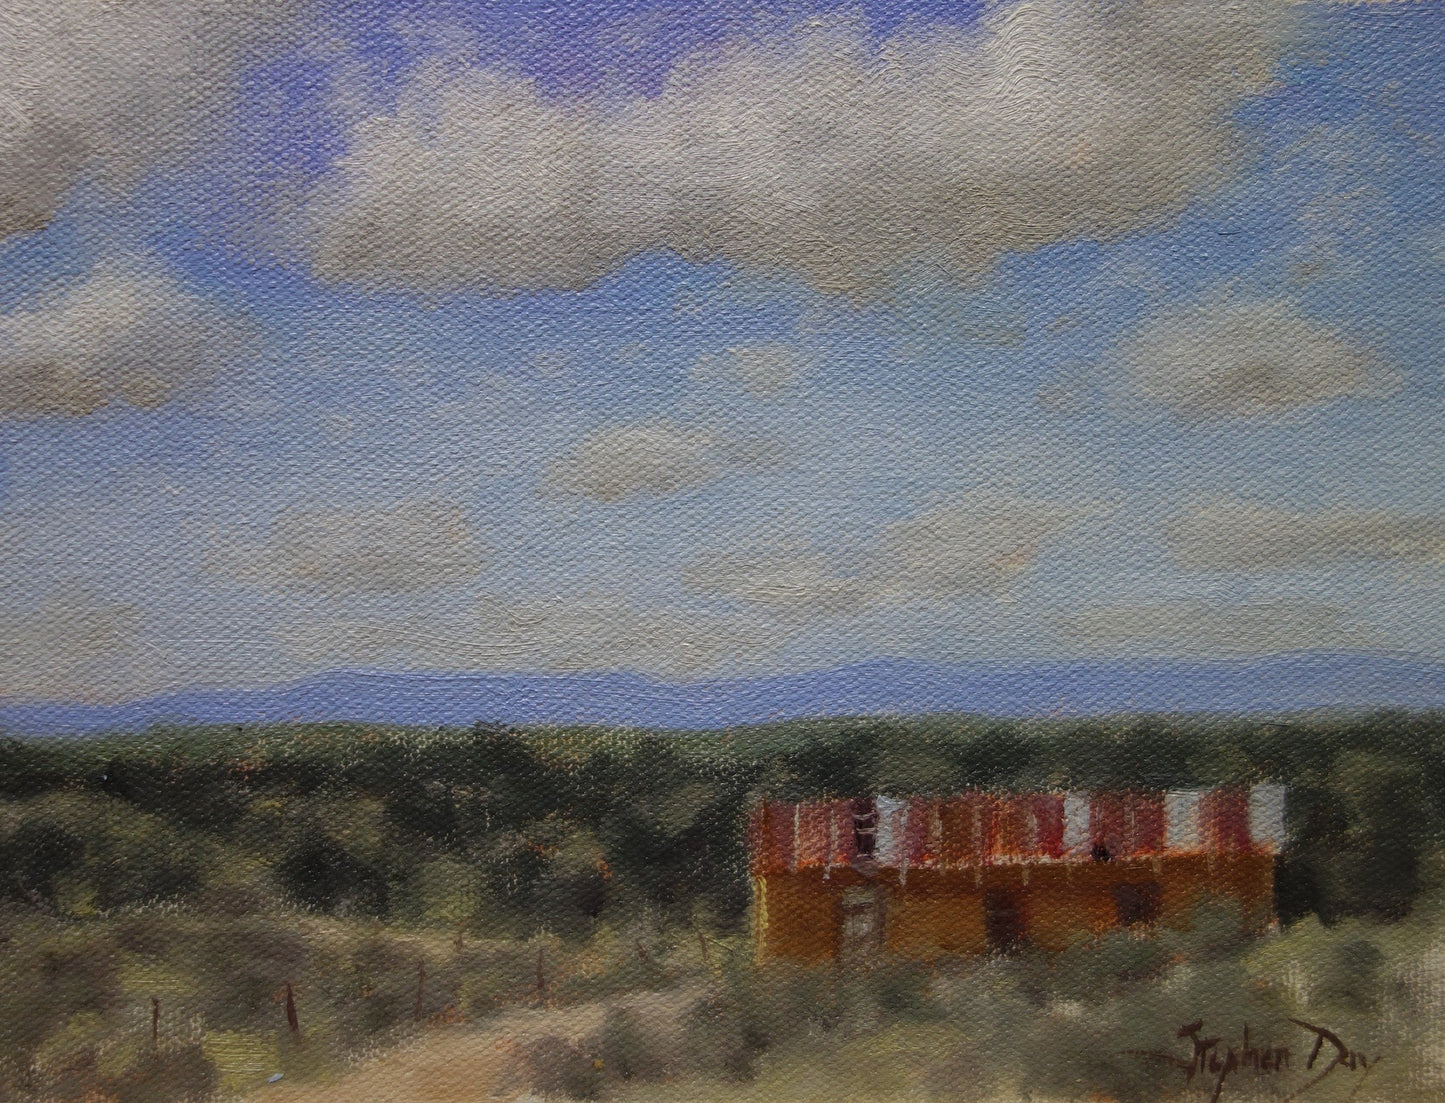 Neglected with a Big View-Painting-Stephen Day-Sorrel Sky Gallery